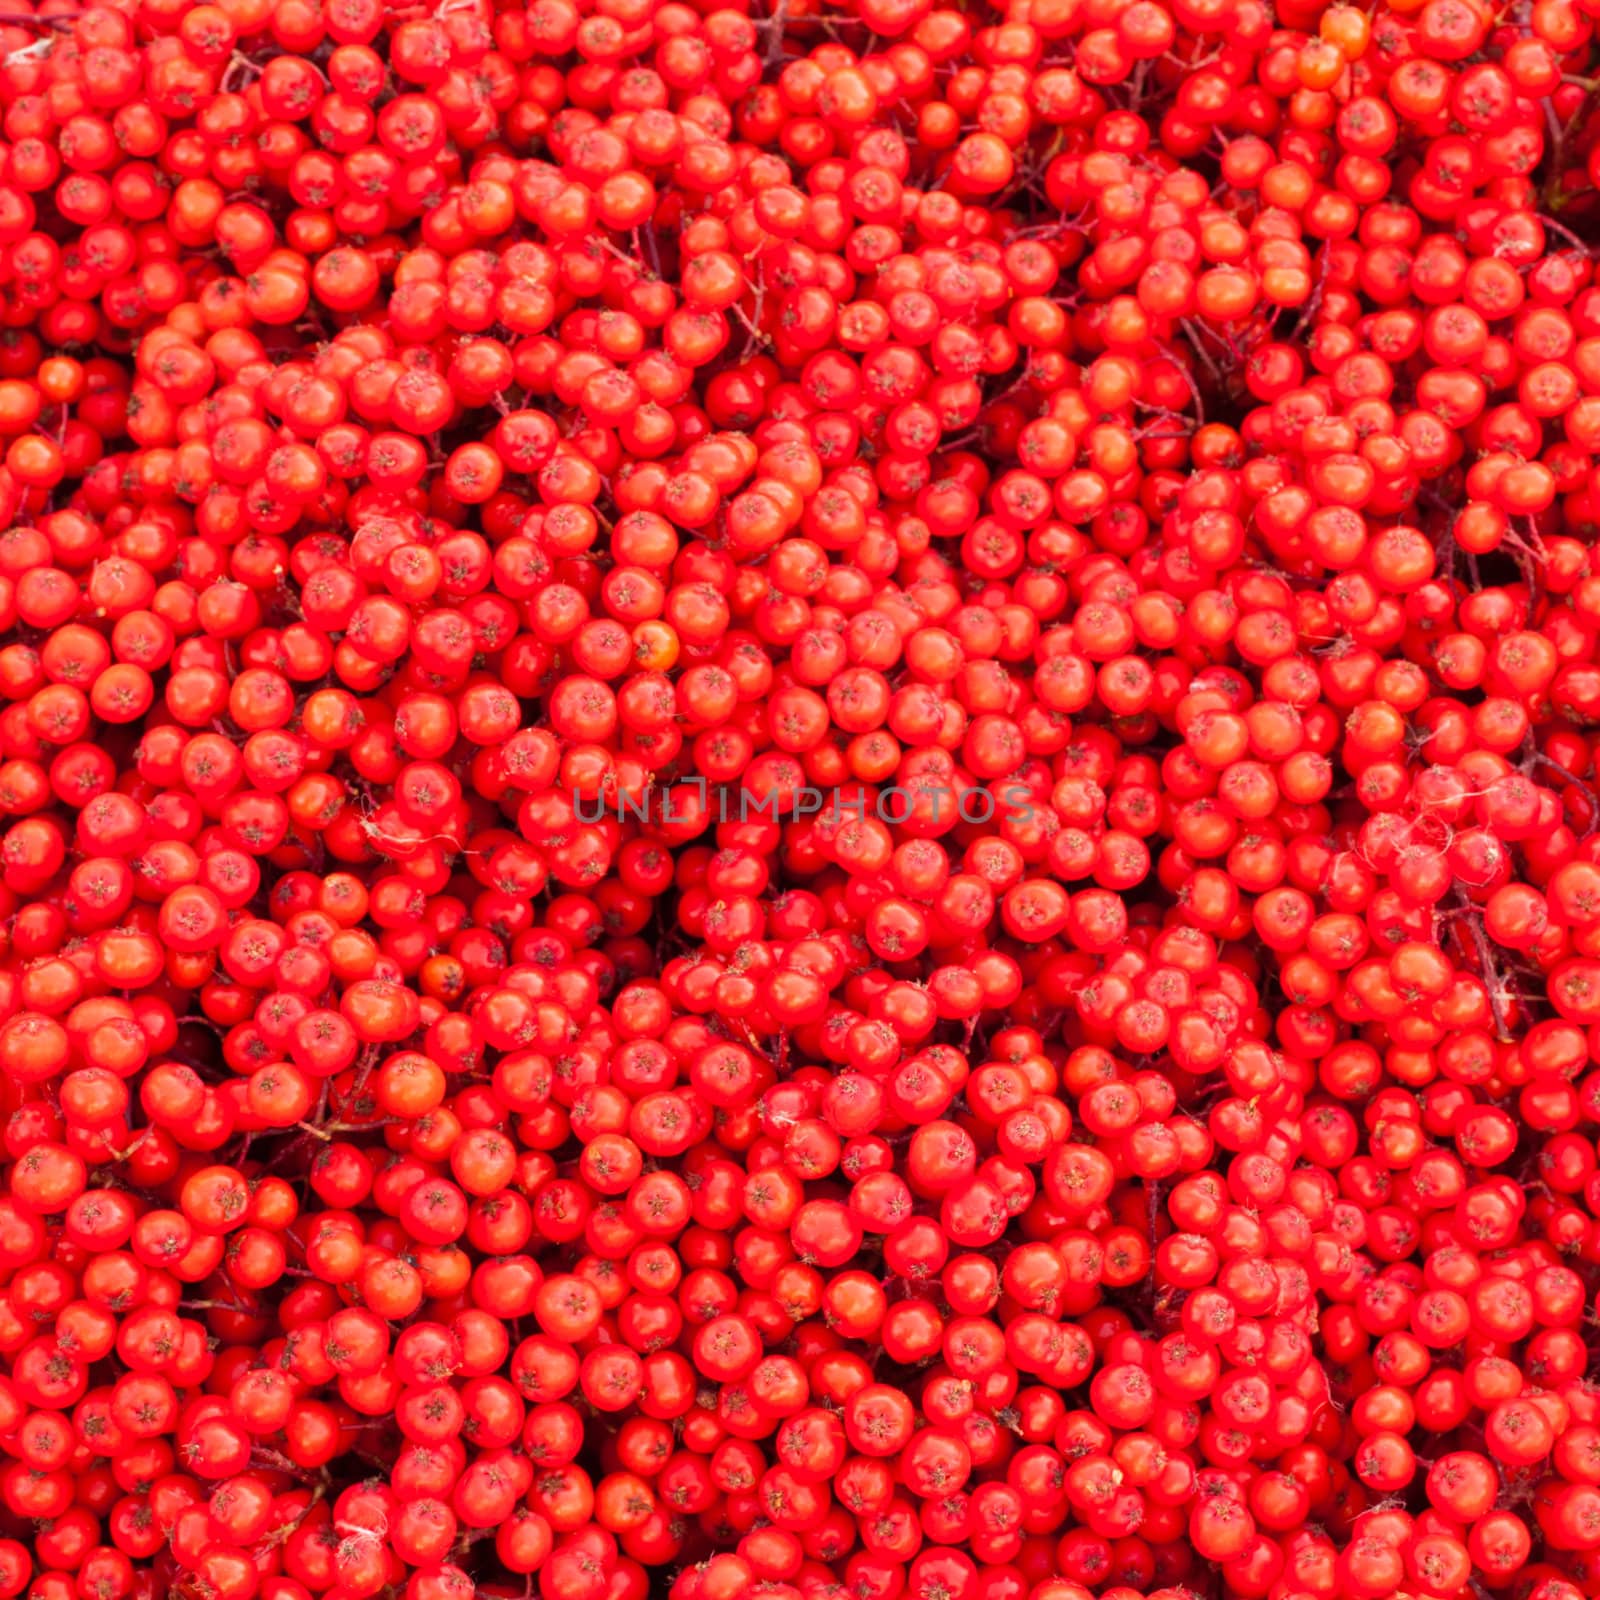 Background texture pattern of red mountain ash berries (Sorbus aucuparia).